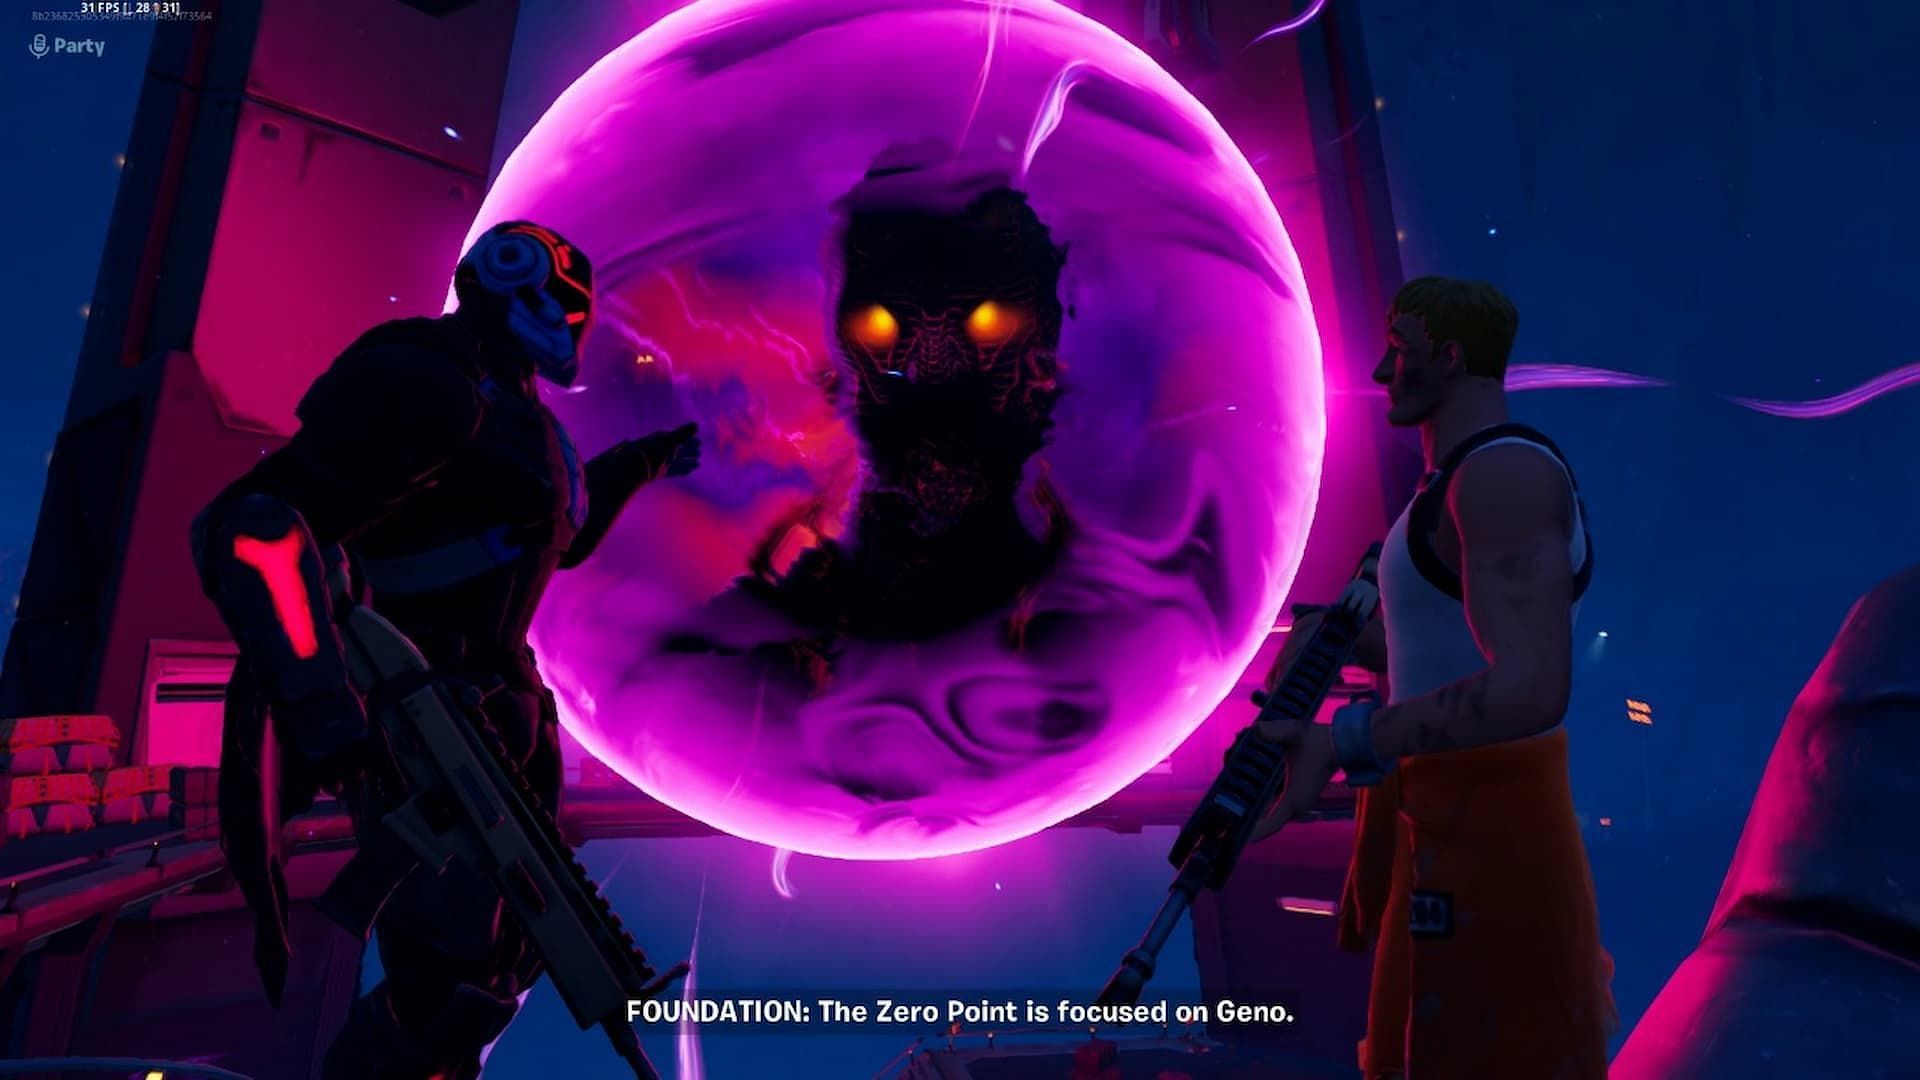 Geno finally made an appearance during the live event in Fortnite. (Screenshot by Sportskeeda)